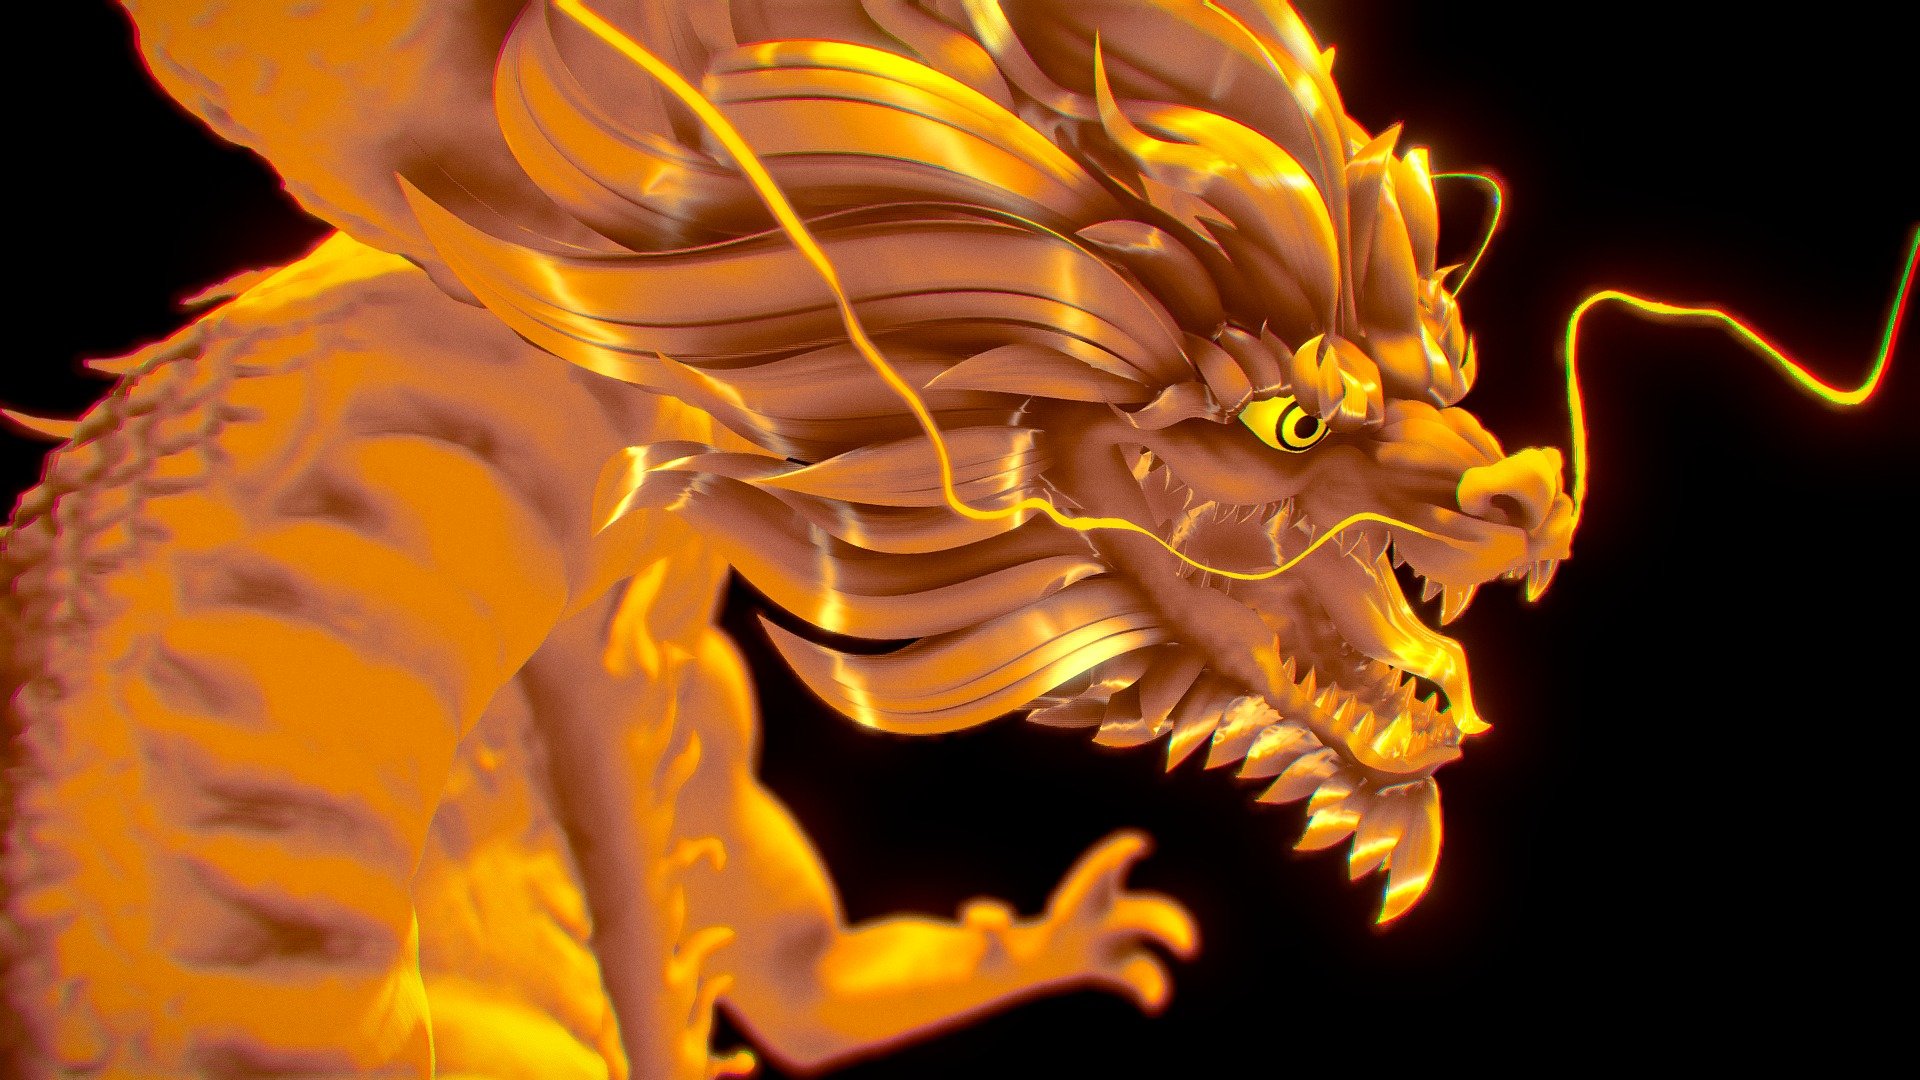 Chinese Dragon Sculpted in Blender 3.1

Full Sculpting Process
https://youtu.be/vyMxNcU0__M - Chinese Dragon - Buy Royalty Free 3D model by Robin Art FX (@robinsonartfx) 3d model